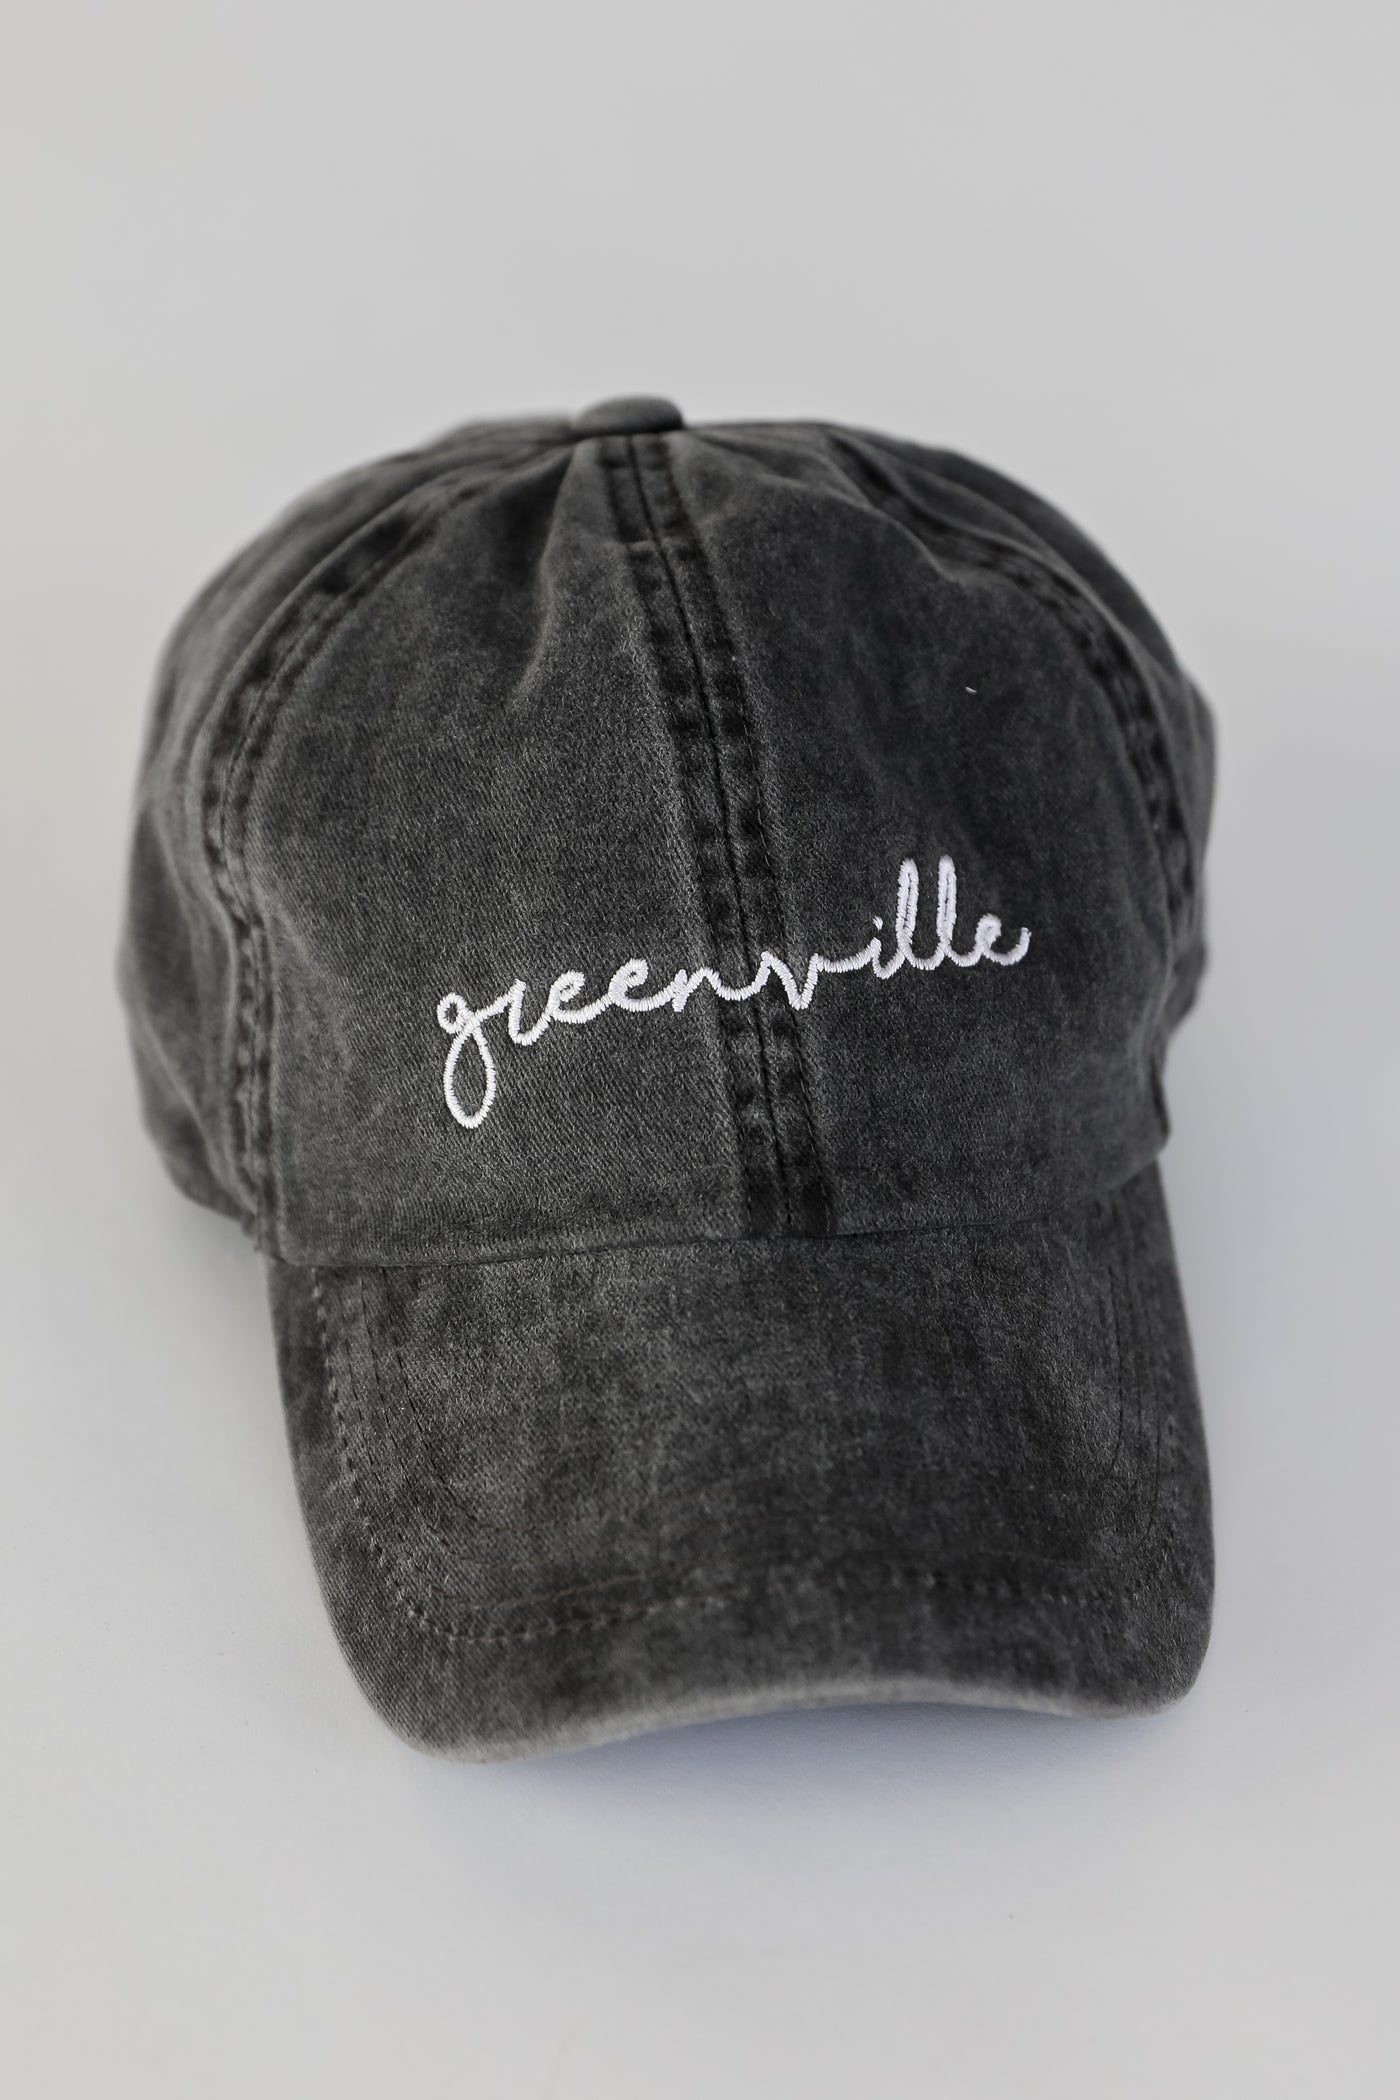 Greenville Script Embroidered Hat in black flat lay